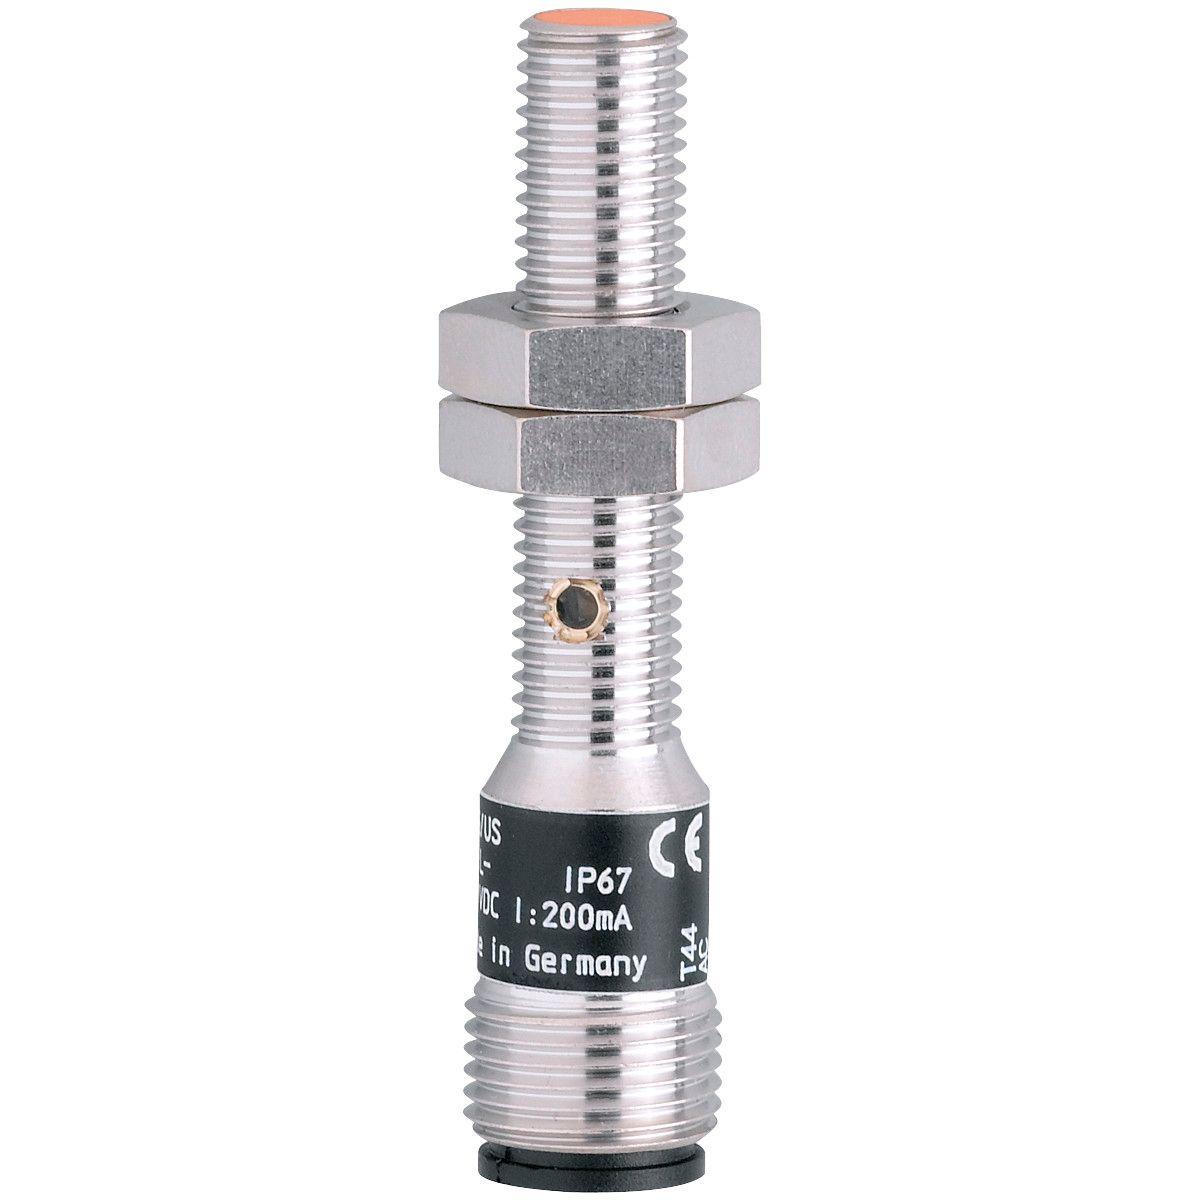 ifm Electronic IE5091 Inductive sensor, Space-saving design, Electrical design: PNP, Output function: normally closed, Sensing range [mm]: 1, Housing: Threaded type, Dimensions [mm]: M8 x 1 / L = 53